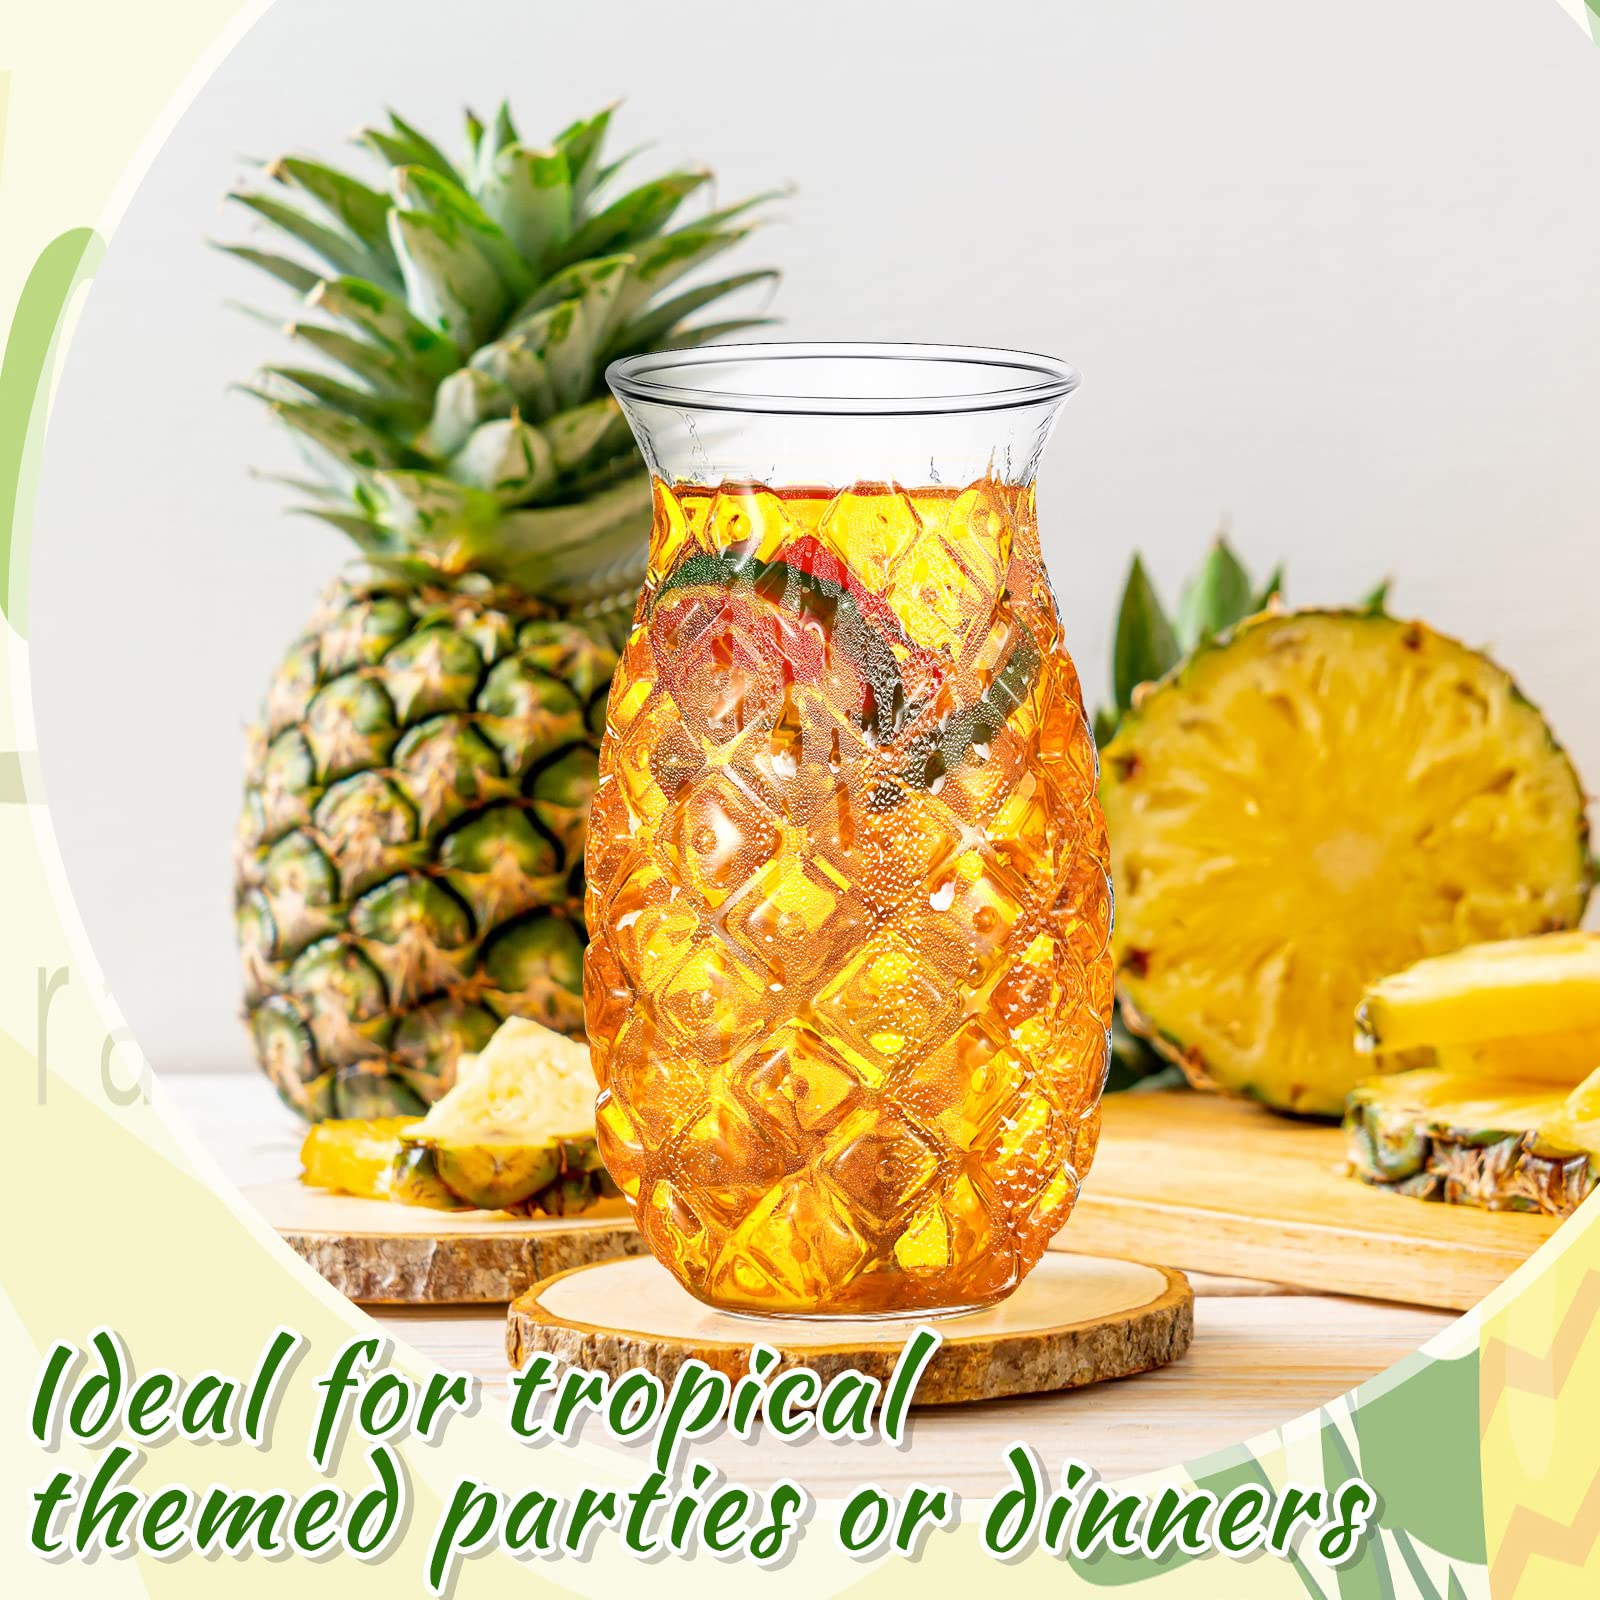 Zubebe Set of 8 Tiki Pineapple Glasses 17 oz Retro Relief Pineapple Cups Clear Pineapple Drinking Cup for Wine Cocktail Drink Martini Whiskey Juice Outdoor Pool Party Picnics